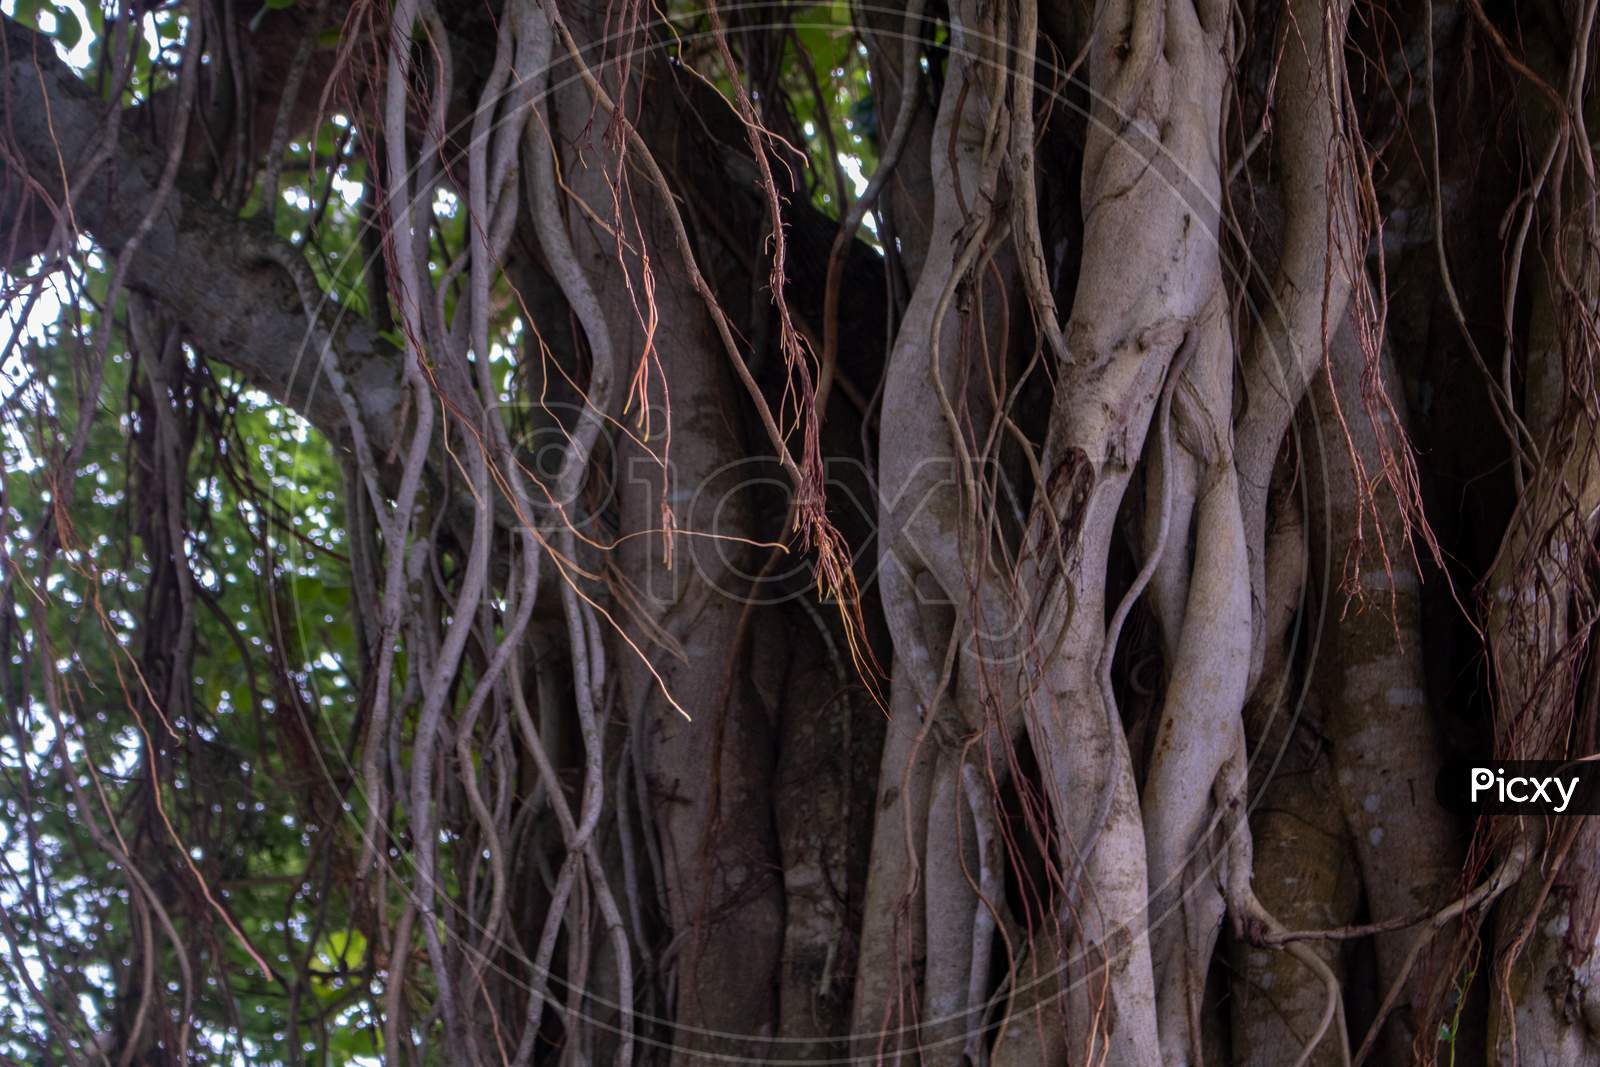 Image Of The Roots Of A Large Bot Tree. Pictures Of Wild Trees. Picture Of The Roots Of A Large Banyan Tree Along The River.